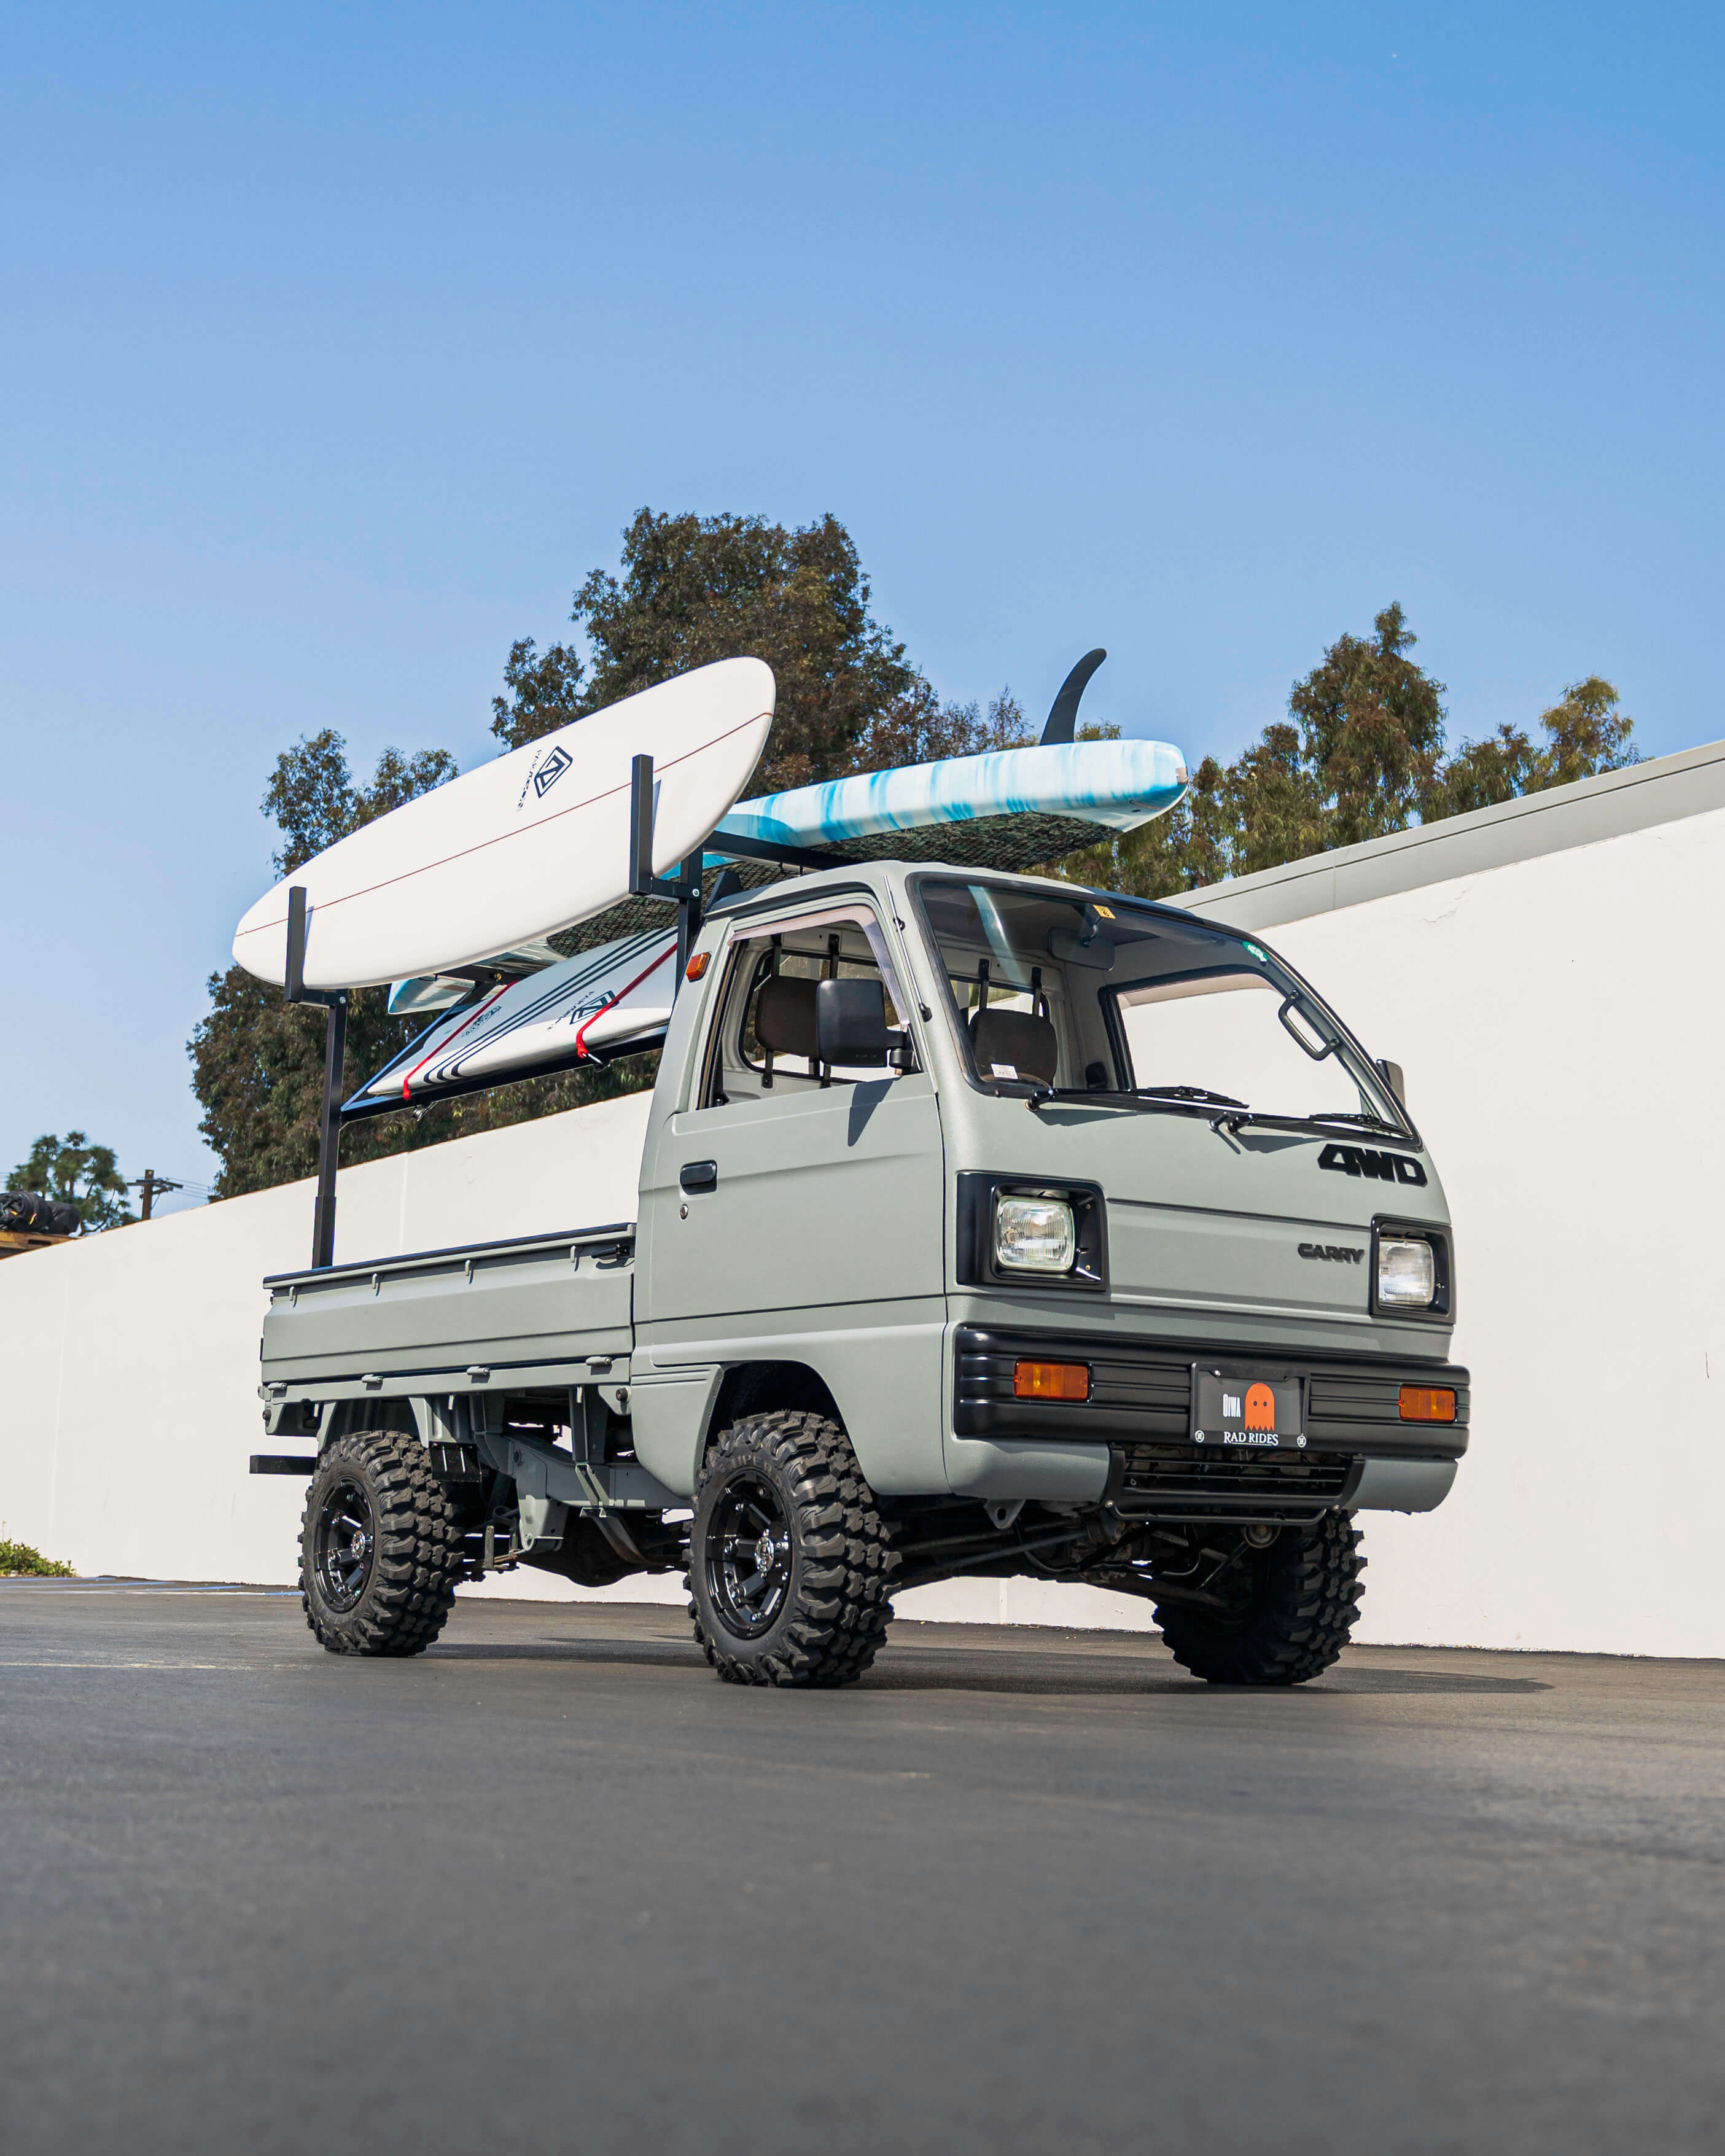 4WD Suzuki Carry Kei Truck with Surfboards Mounted on Roof Rack in a Sunny Outdoor Setting